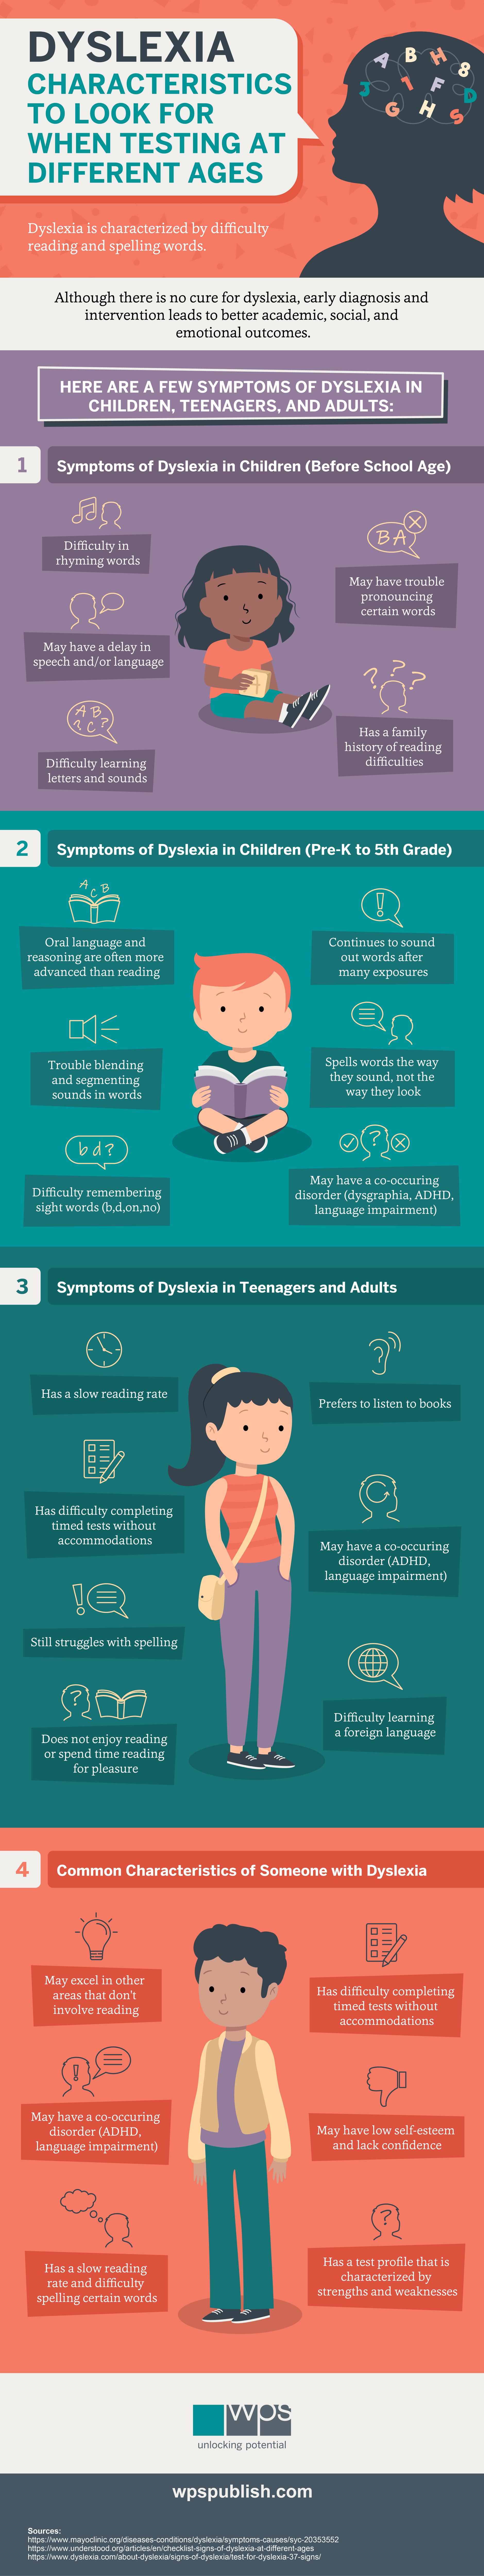 Characteristics of Dyslexia to Look For When Testing at Different Ages